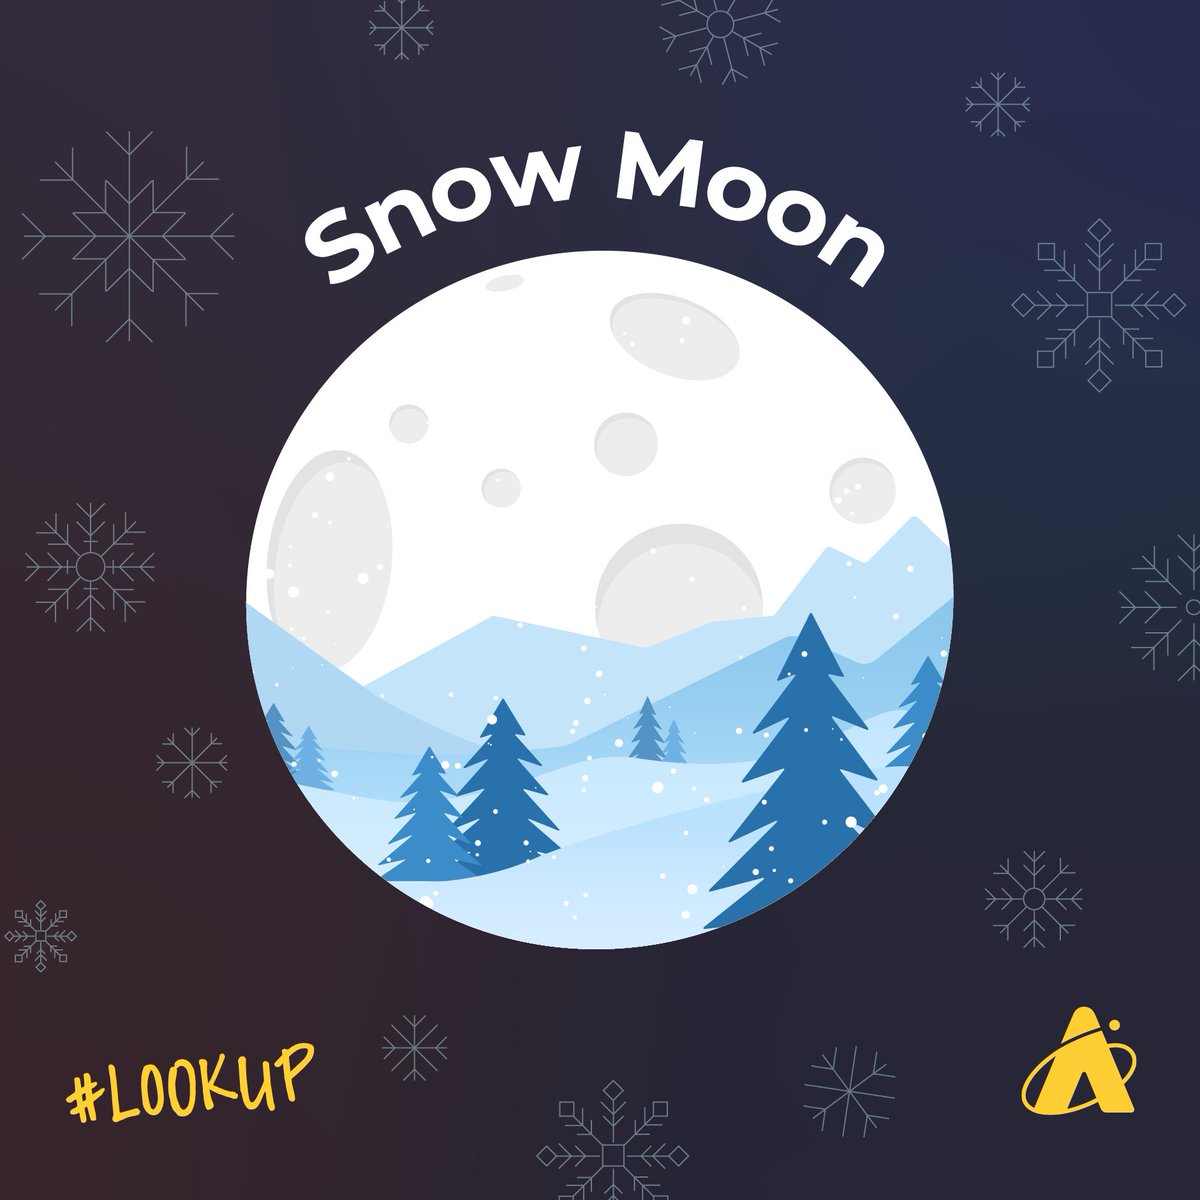 Not trying to manifest flurries over here...but... ❄️ February is often the snowiest month in North America, which is why tonight's full Moon is known as the snow Moon or midwinter Moon. If you've got clear skies in your area, look up at our rocky celestial neighbor!